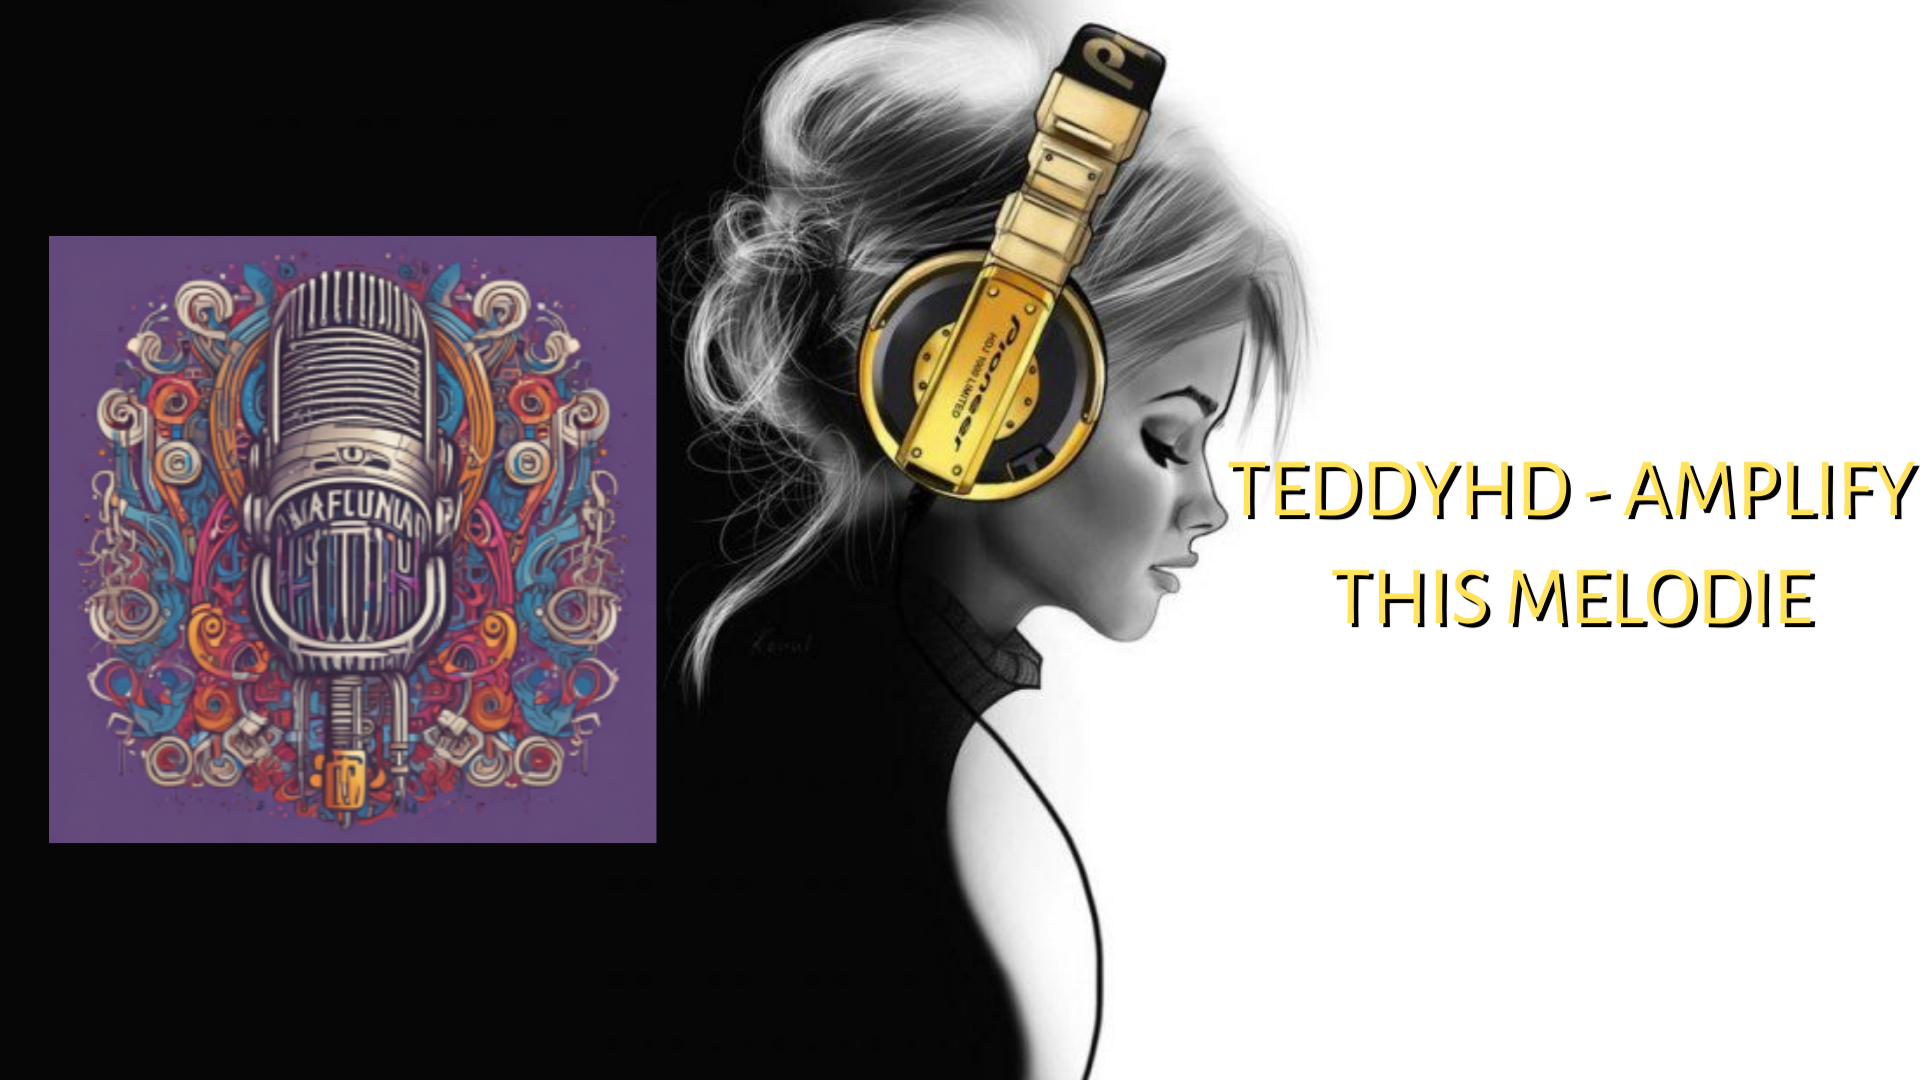 TeddyHD - Amplify this melodie